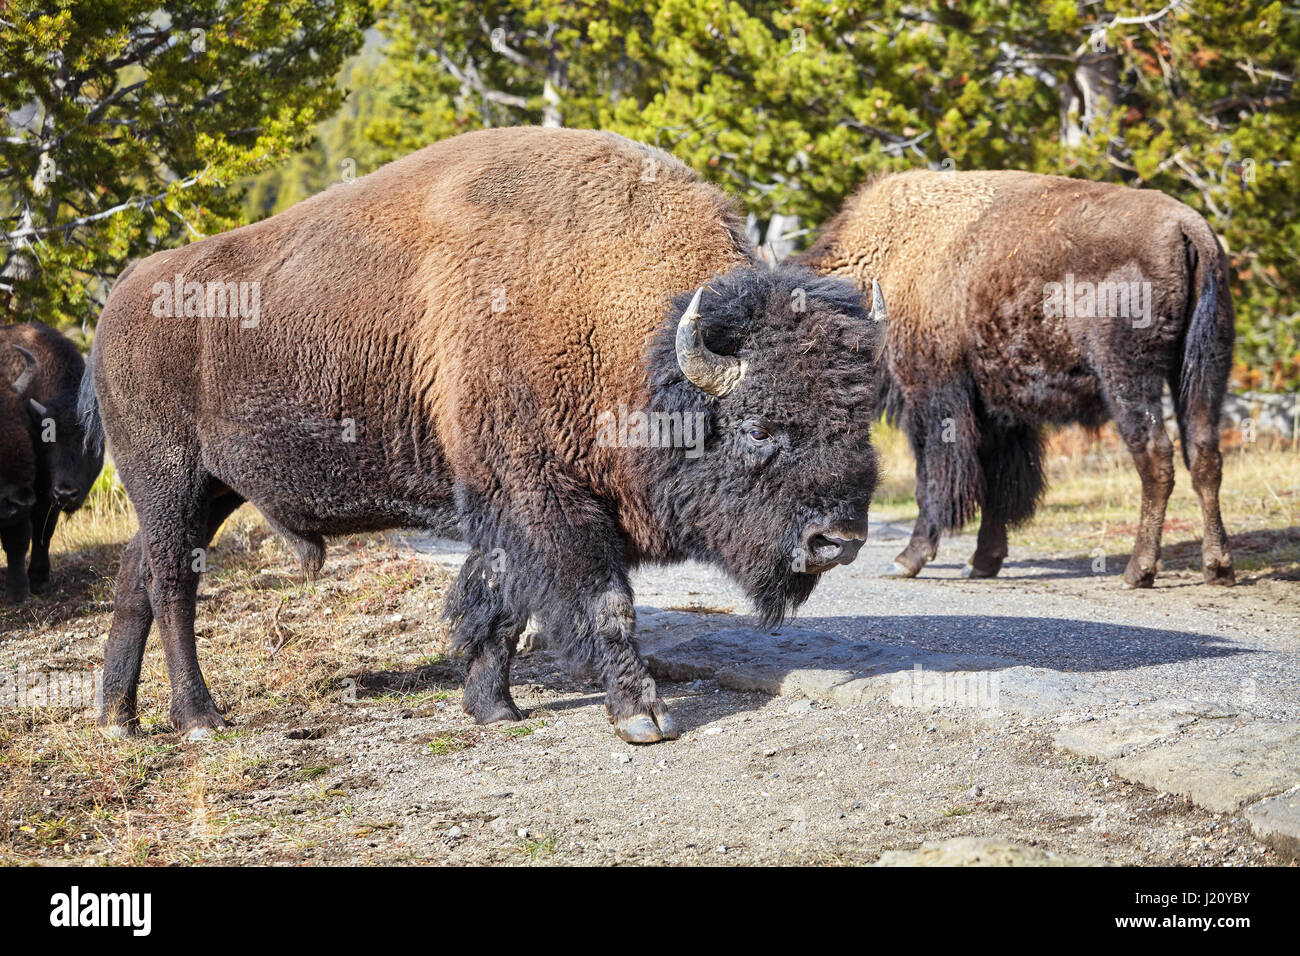 American bison (Bison bison) in Yellowstone National Park, Wyoming, USA. Stock Photo